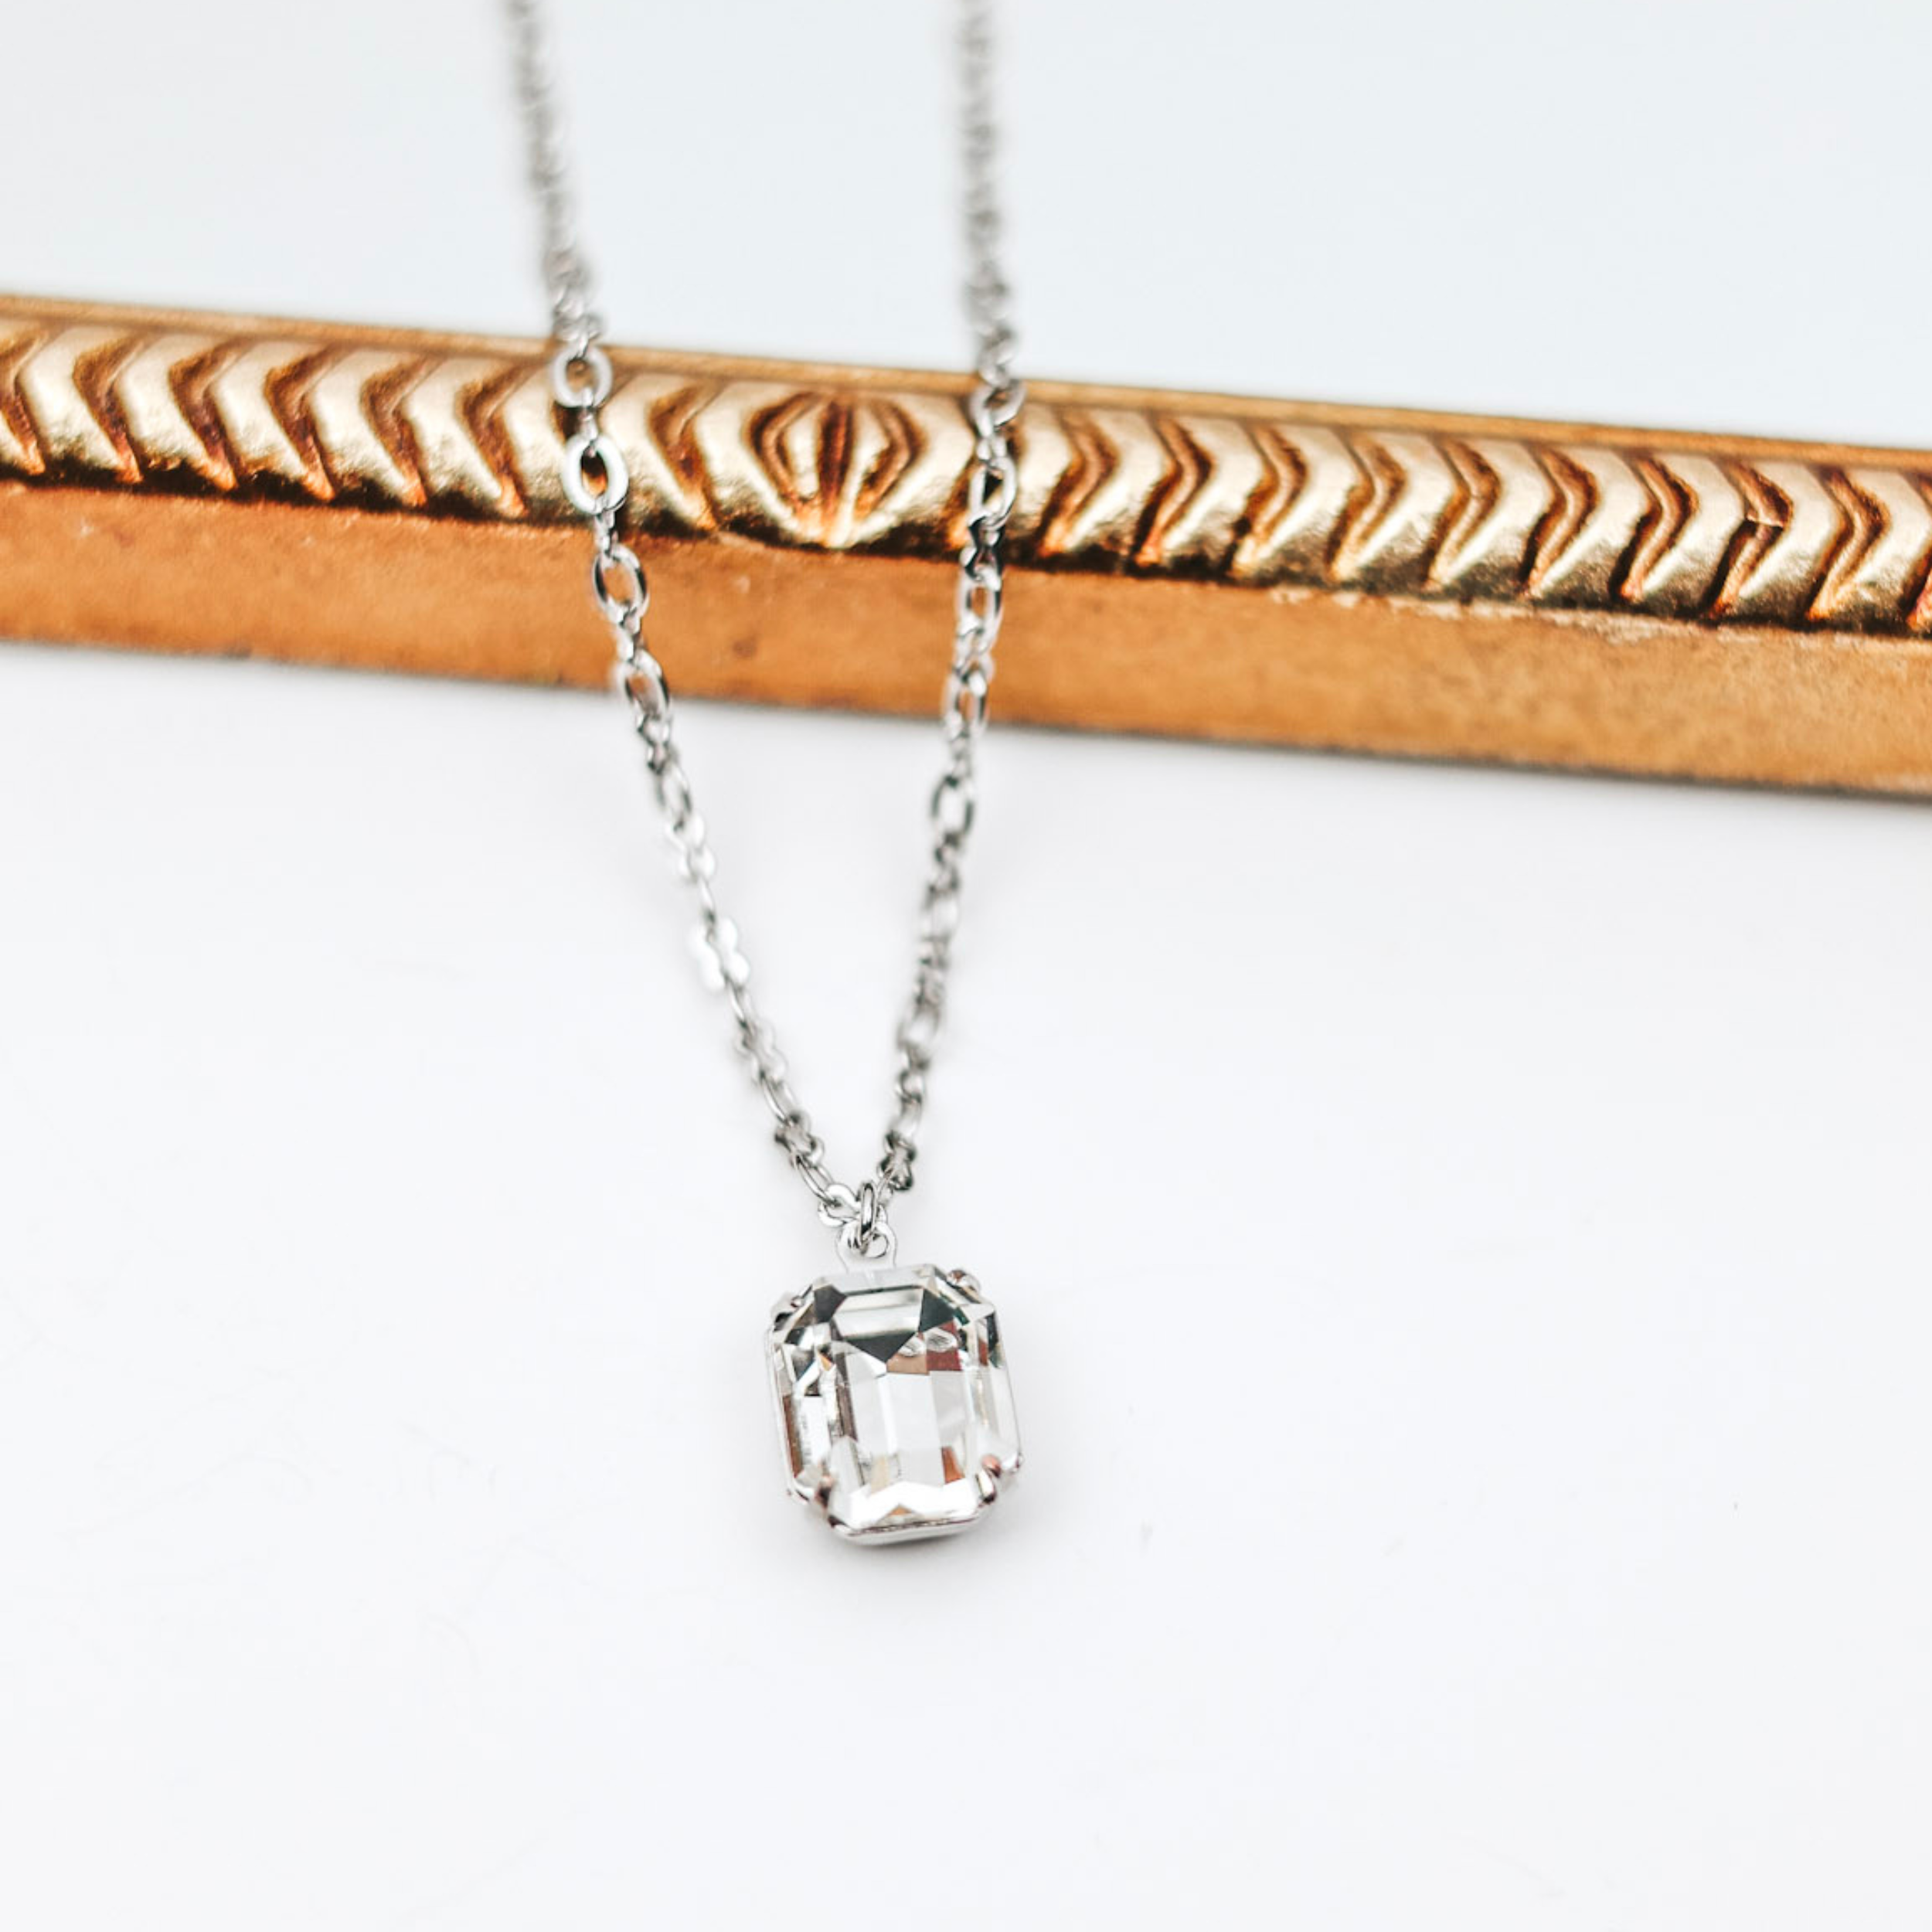 A silver-tone necklace with a single crystal pendant that is emerald cut. This necklace is pictured on a white background with a mirror.